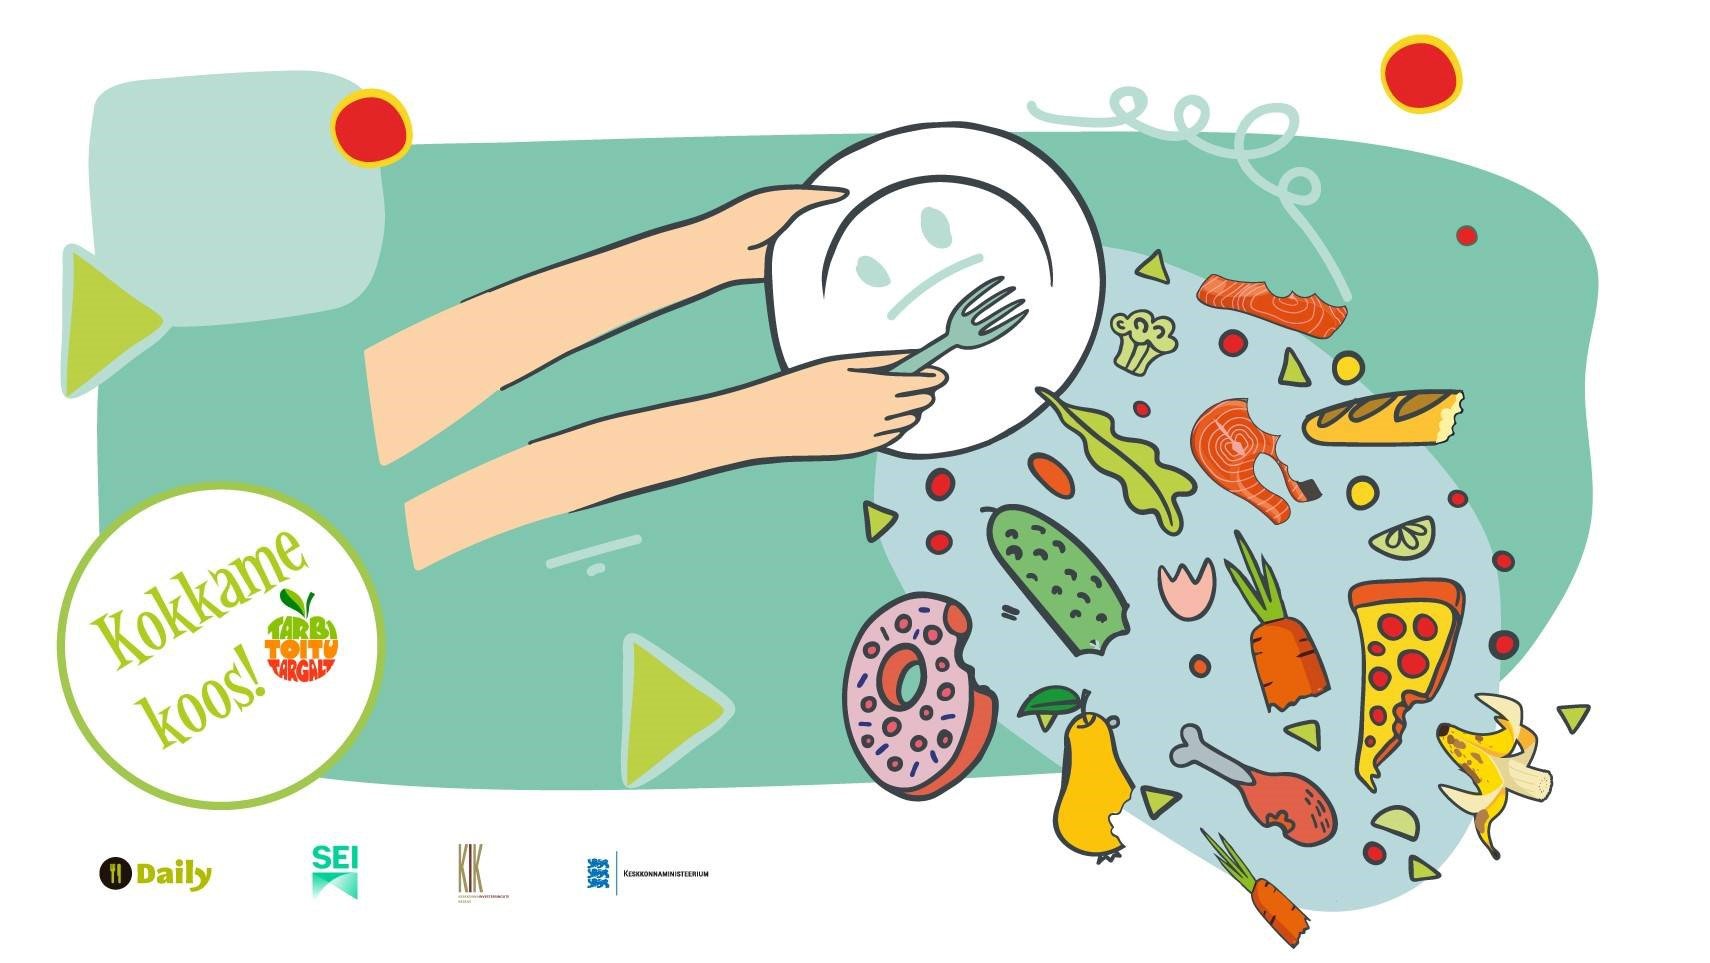 The “Let’s Cook Together!” campaign in Estonian schools, which aimed at reducing food waste.